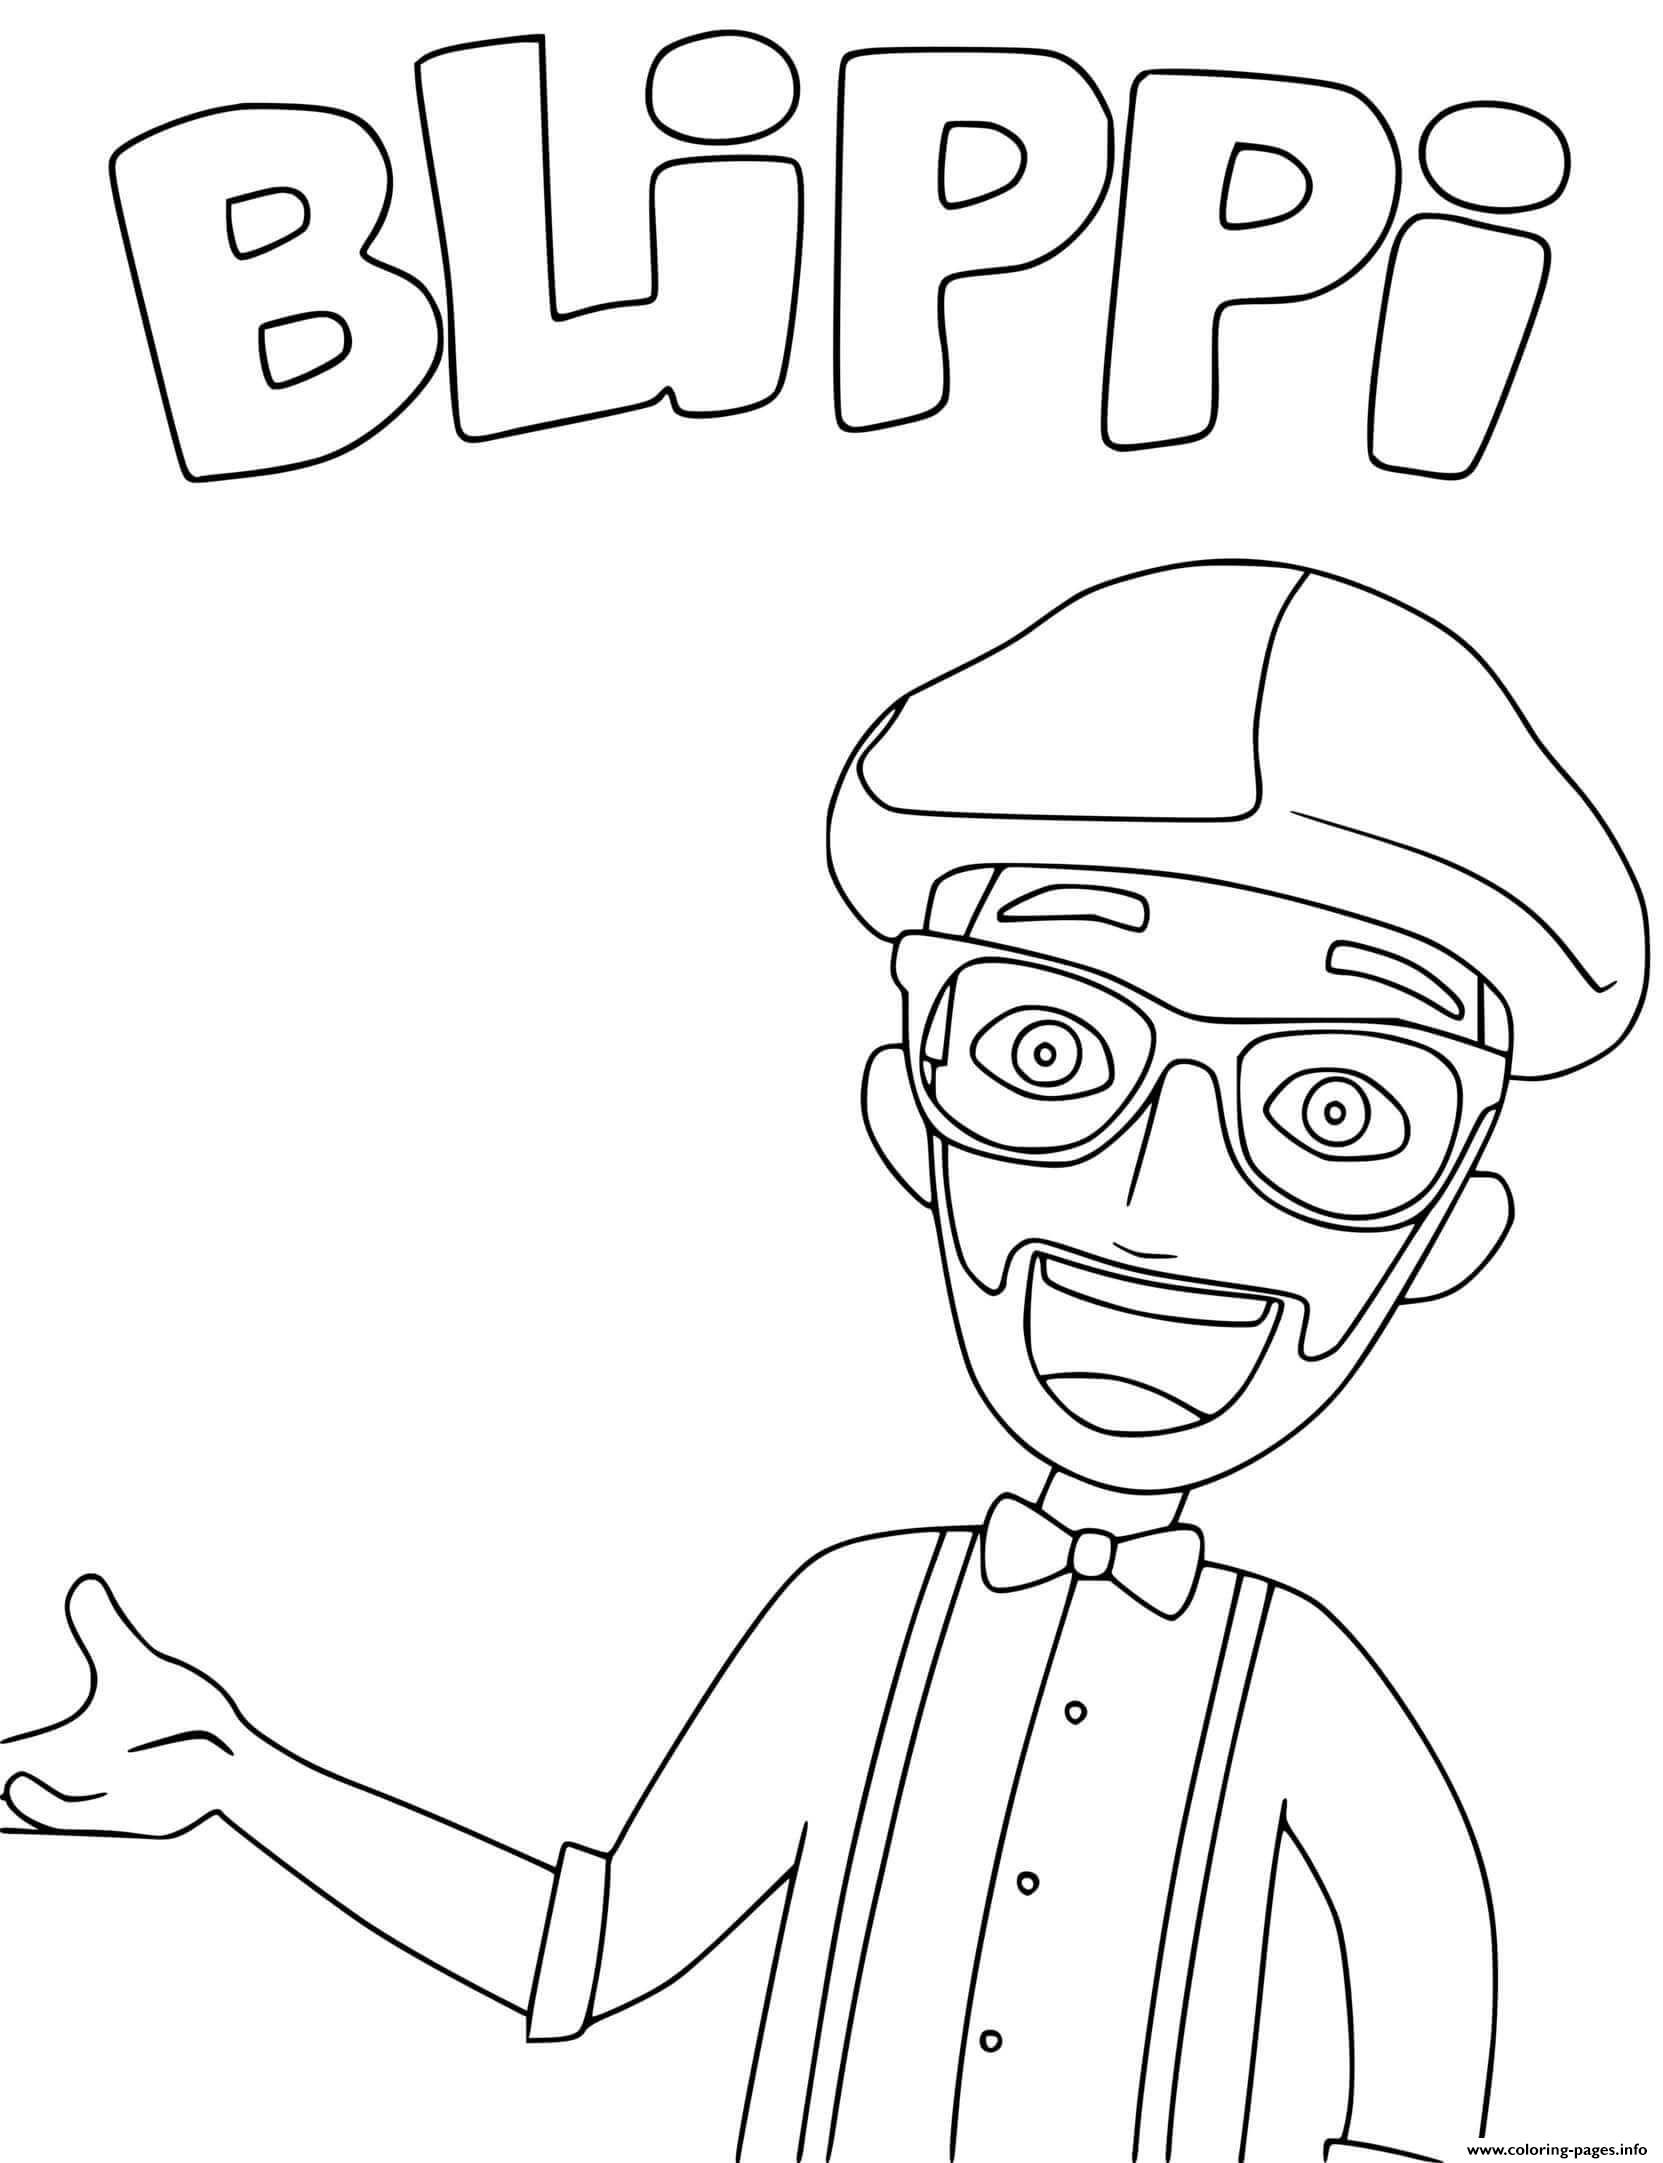 Blippi Coloring Book Download 886+ File Include SVG PNG EPS DXF